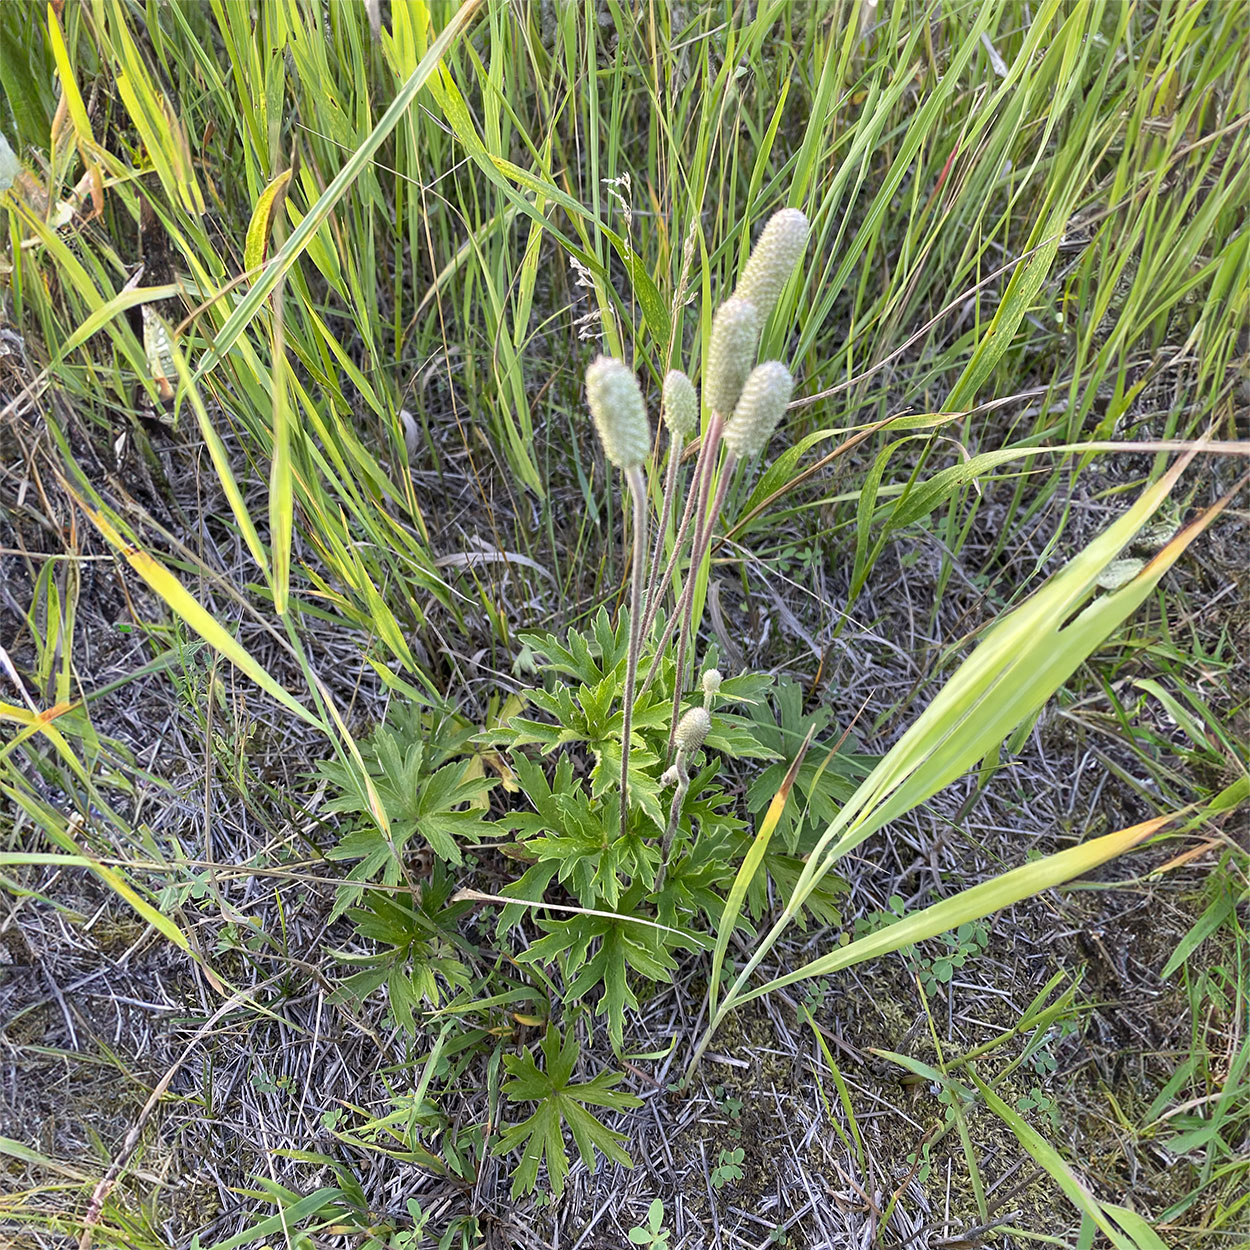 White, oblong flowers on tall stems and green grass surrounded by brown prairie soil